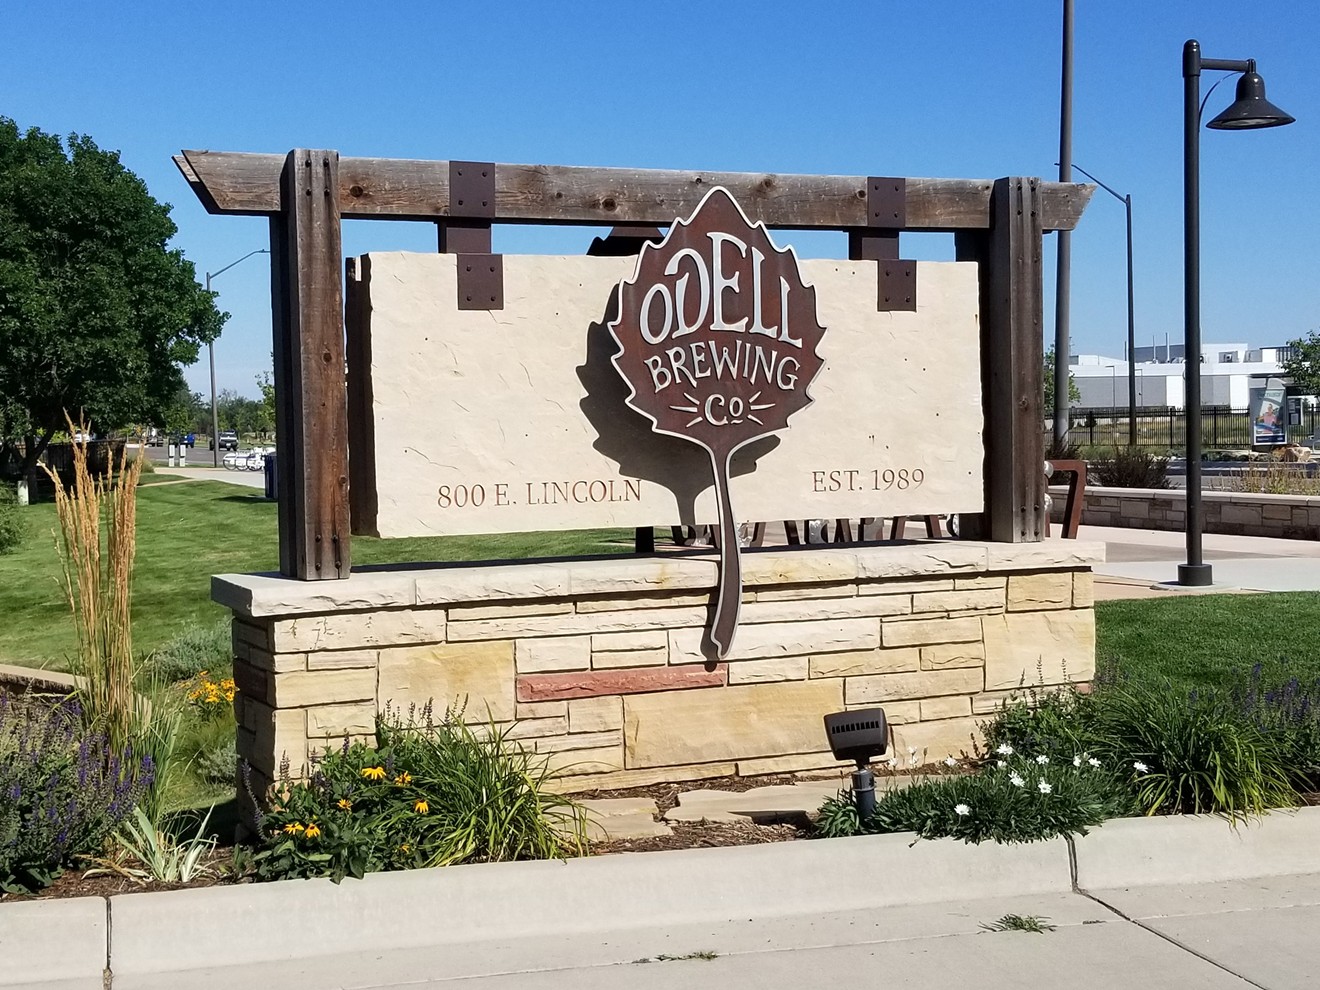 Odell Brewing in Fort Collins will soon break ground to build a winery and tasting room adjacent to its brewery.